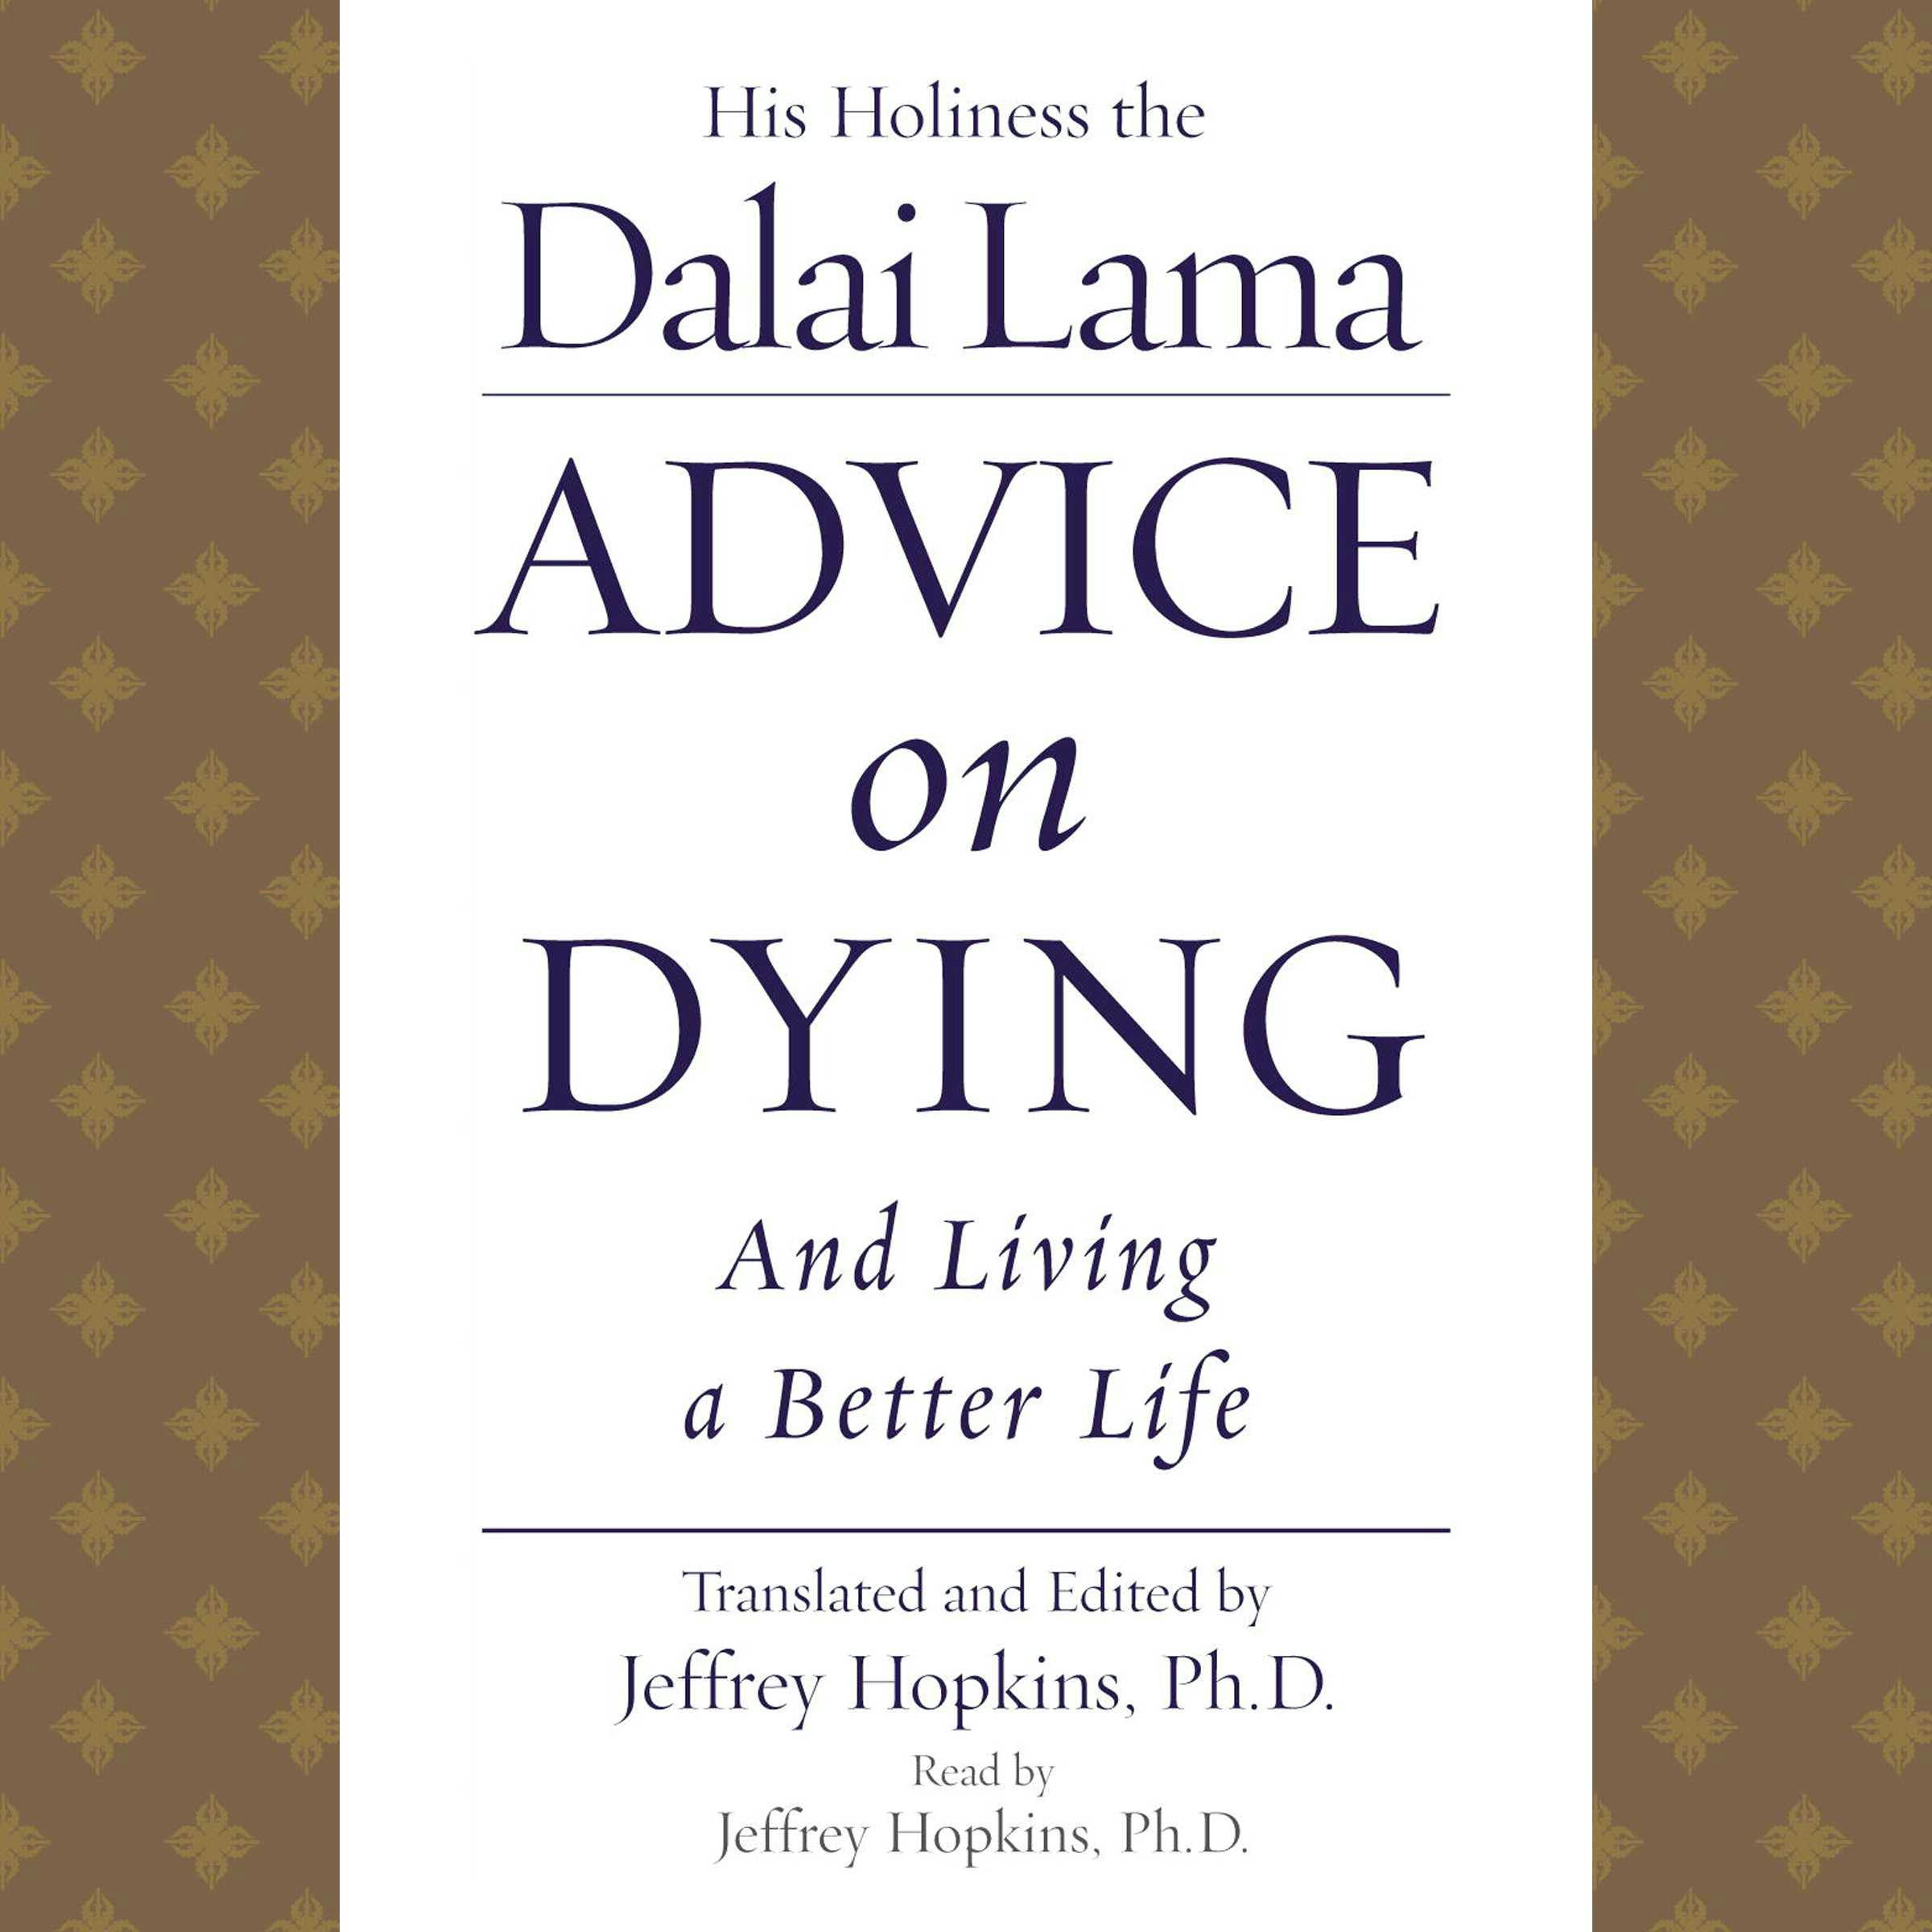 Advice On Dying: And Living a Better Life - His Holiness the Dalai Lama